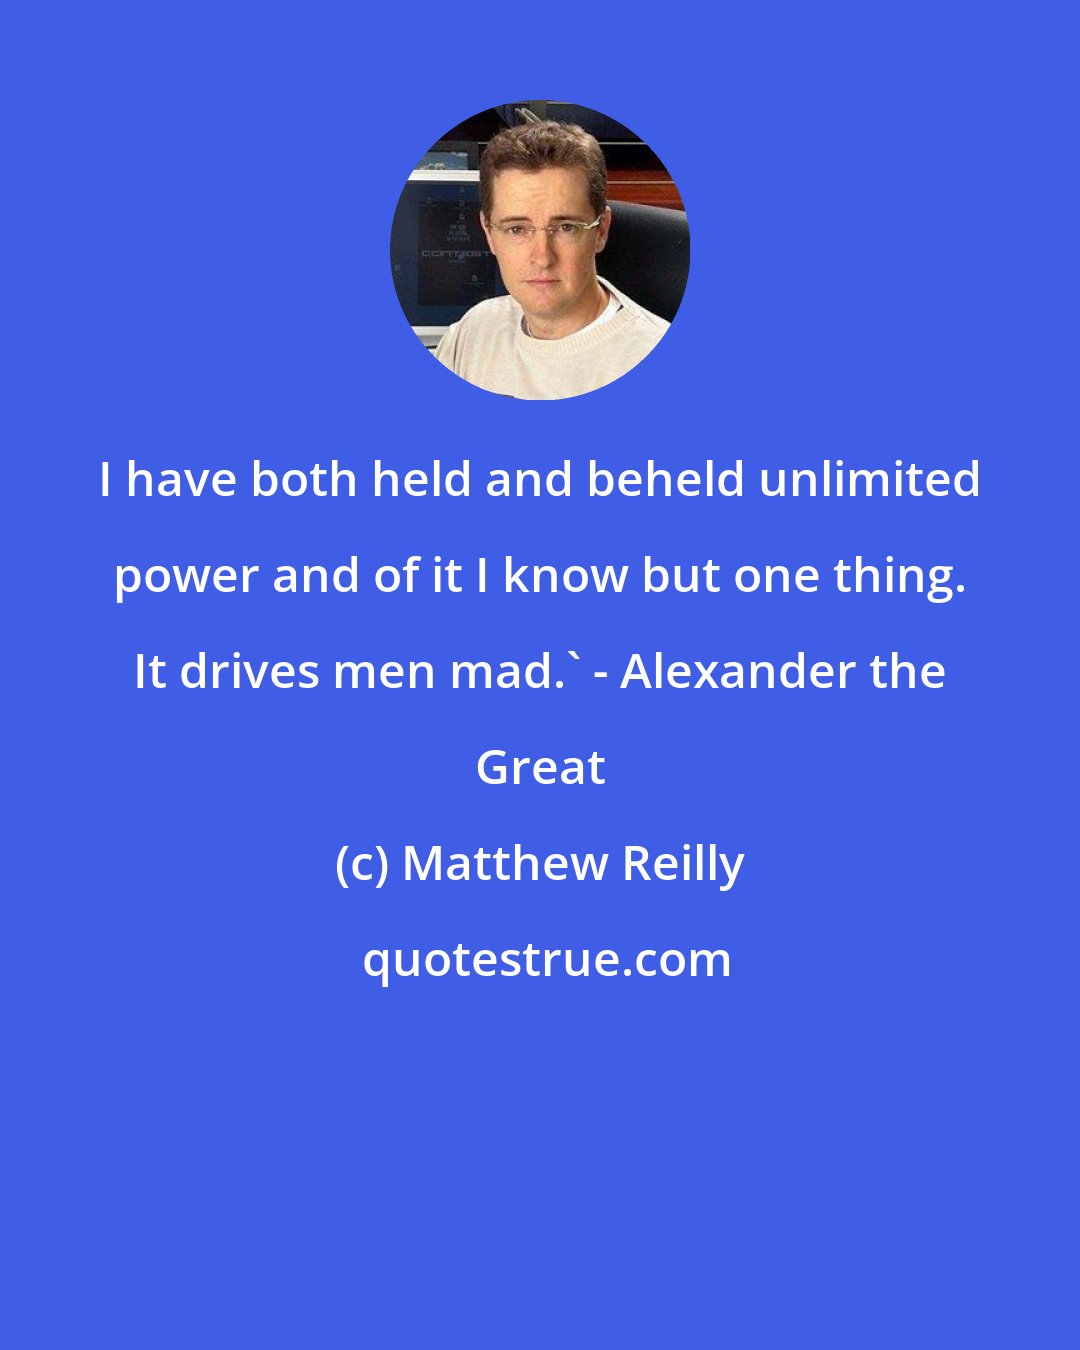 Matthew Reilly: I have both held and beheld unlimited power and of it I know but one thing. It drives men mad.' - Alexander the Great